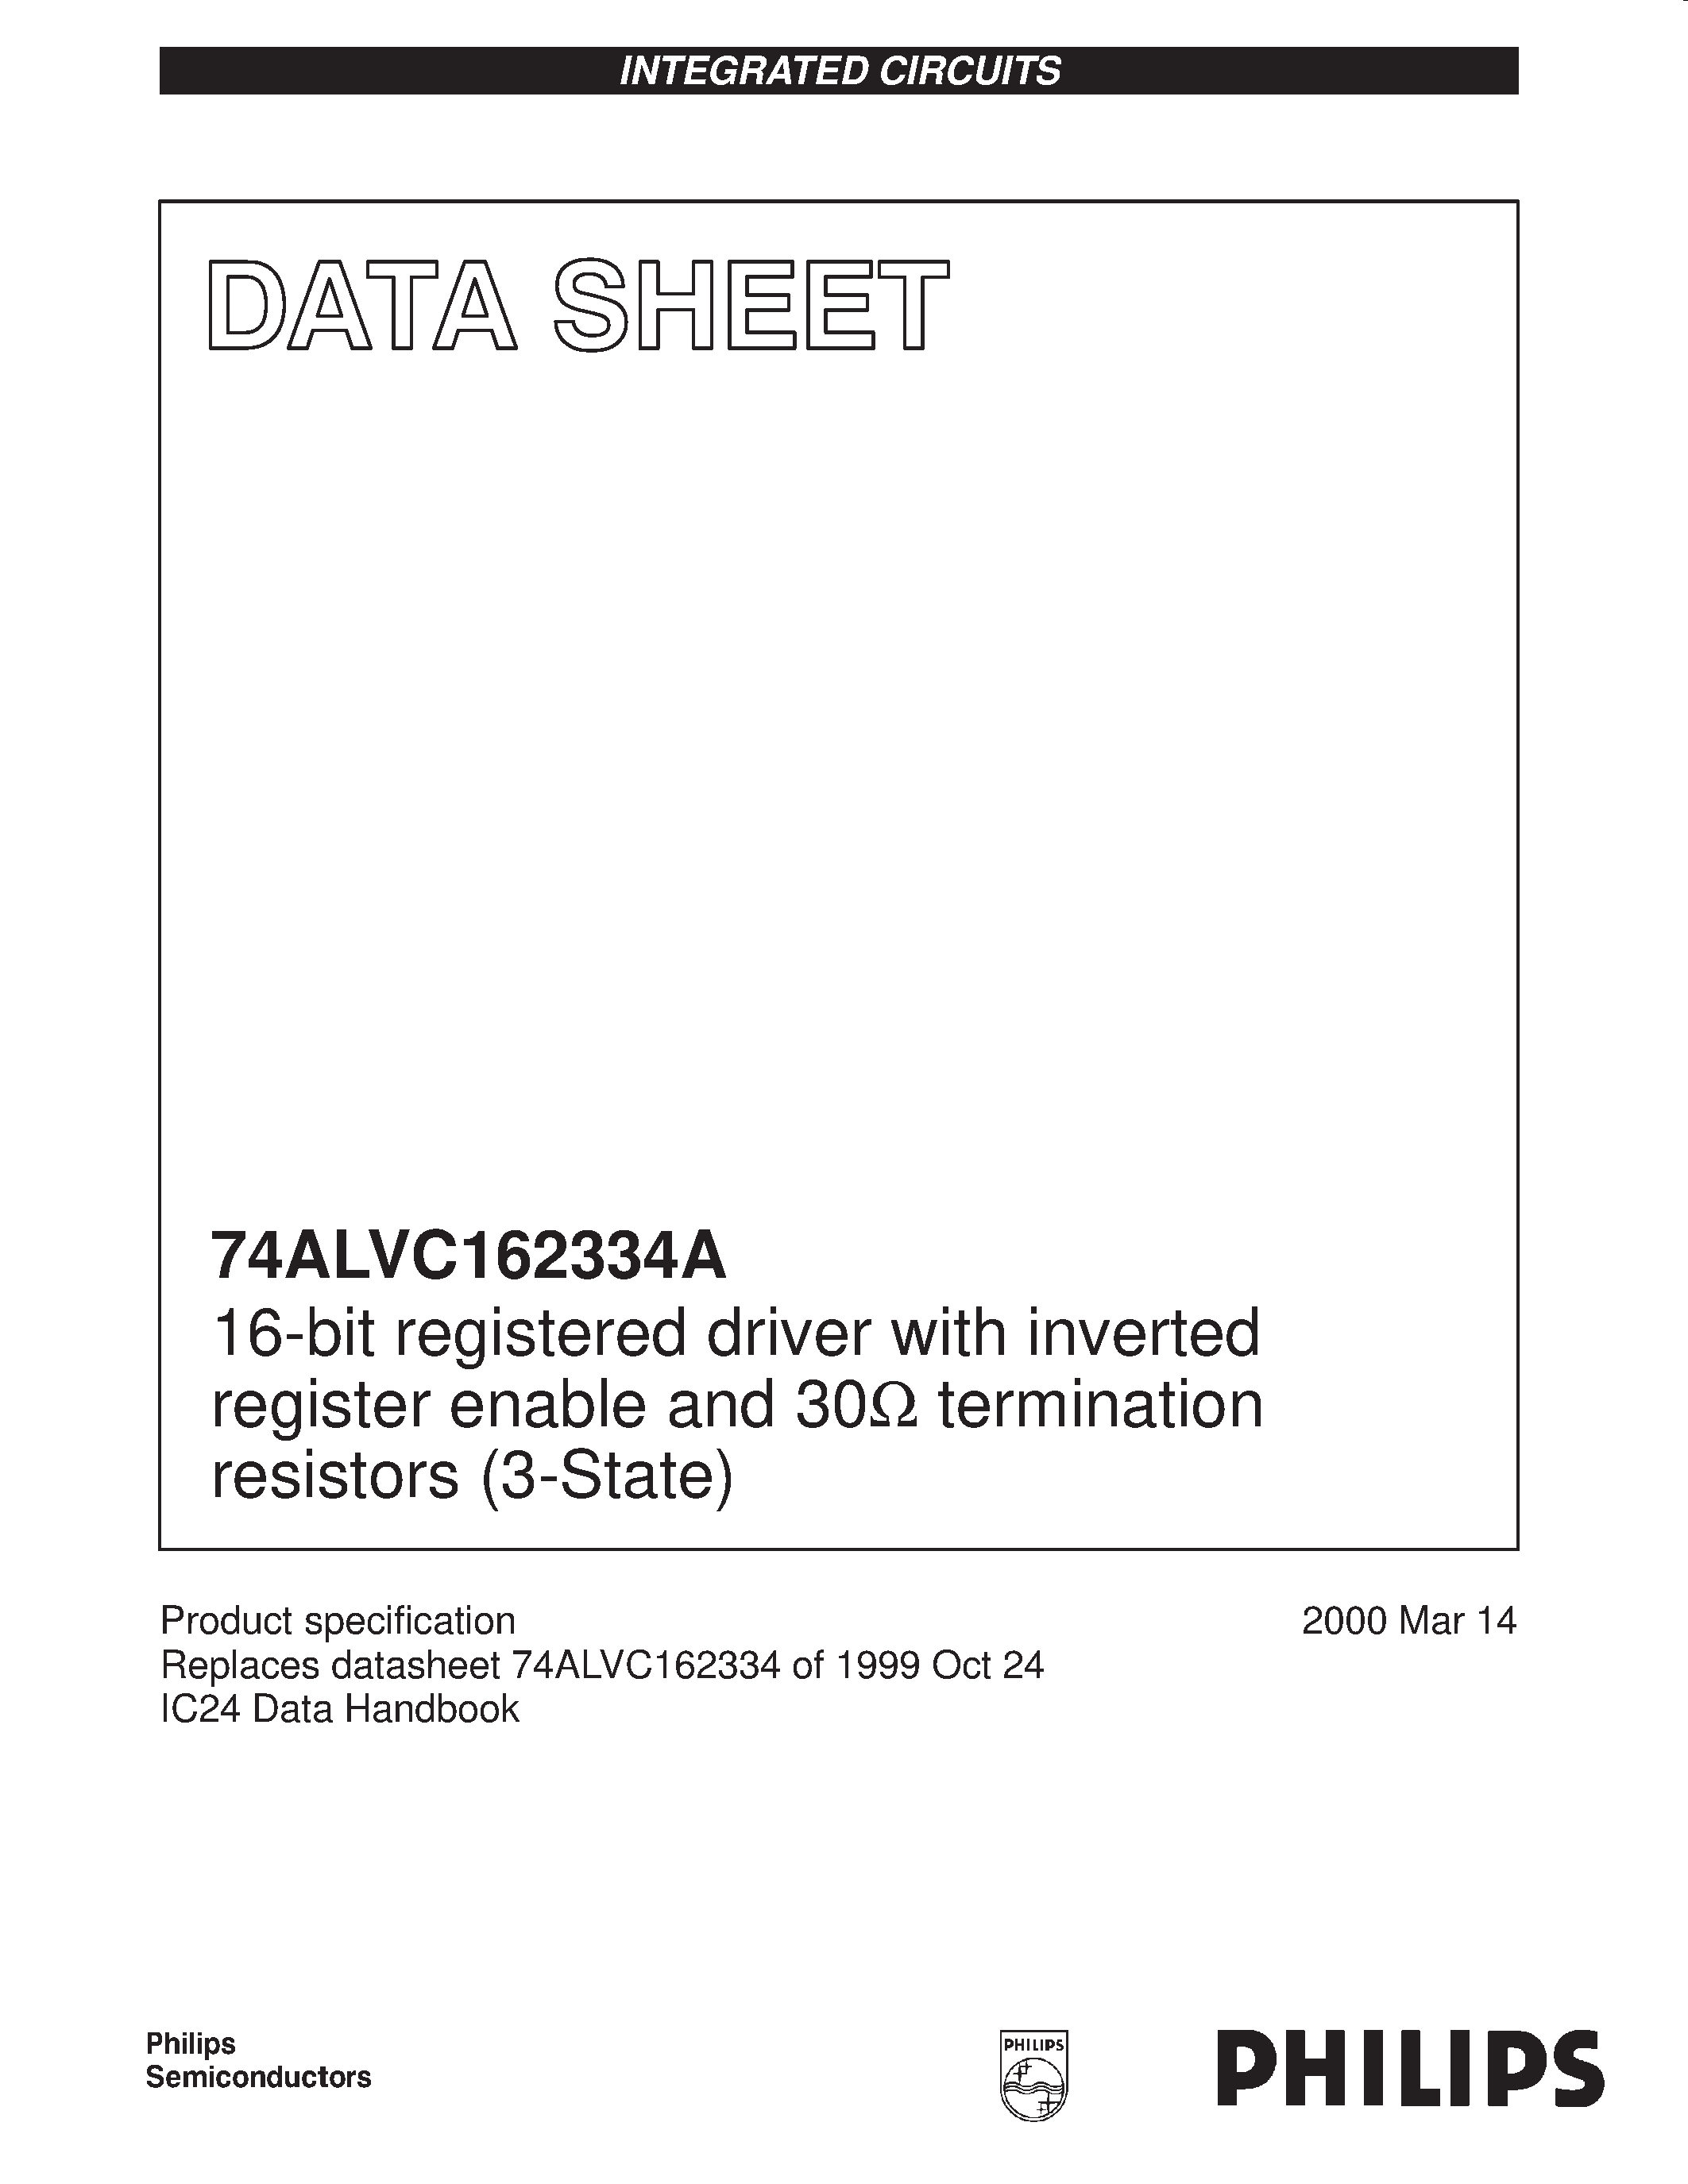 Datasheet 74ALVC162334A - 16-bit registered driver with inverted register enable and 30ohm termination resistors 3-State page 1